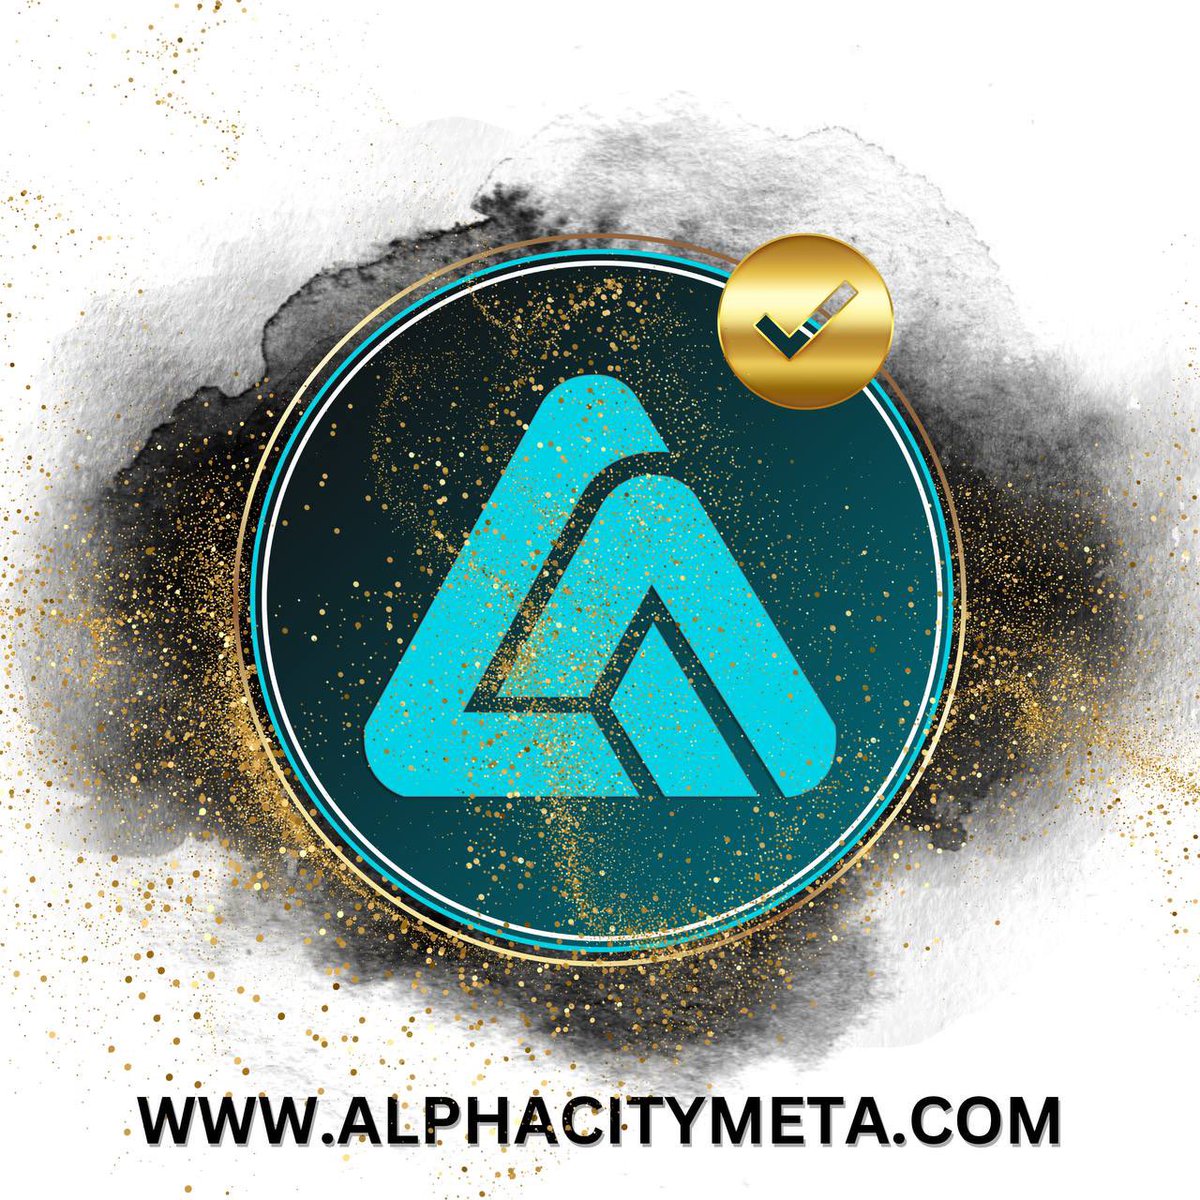 As we get closer to our relaunch we  are happy to announce that we have now been accepted as a Gold Verified organisation here on X.

Lots of work and development takes place everyday in the AlphaMetaEcosystem this is just the start. #AlphaCityAI